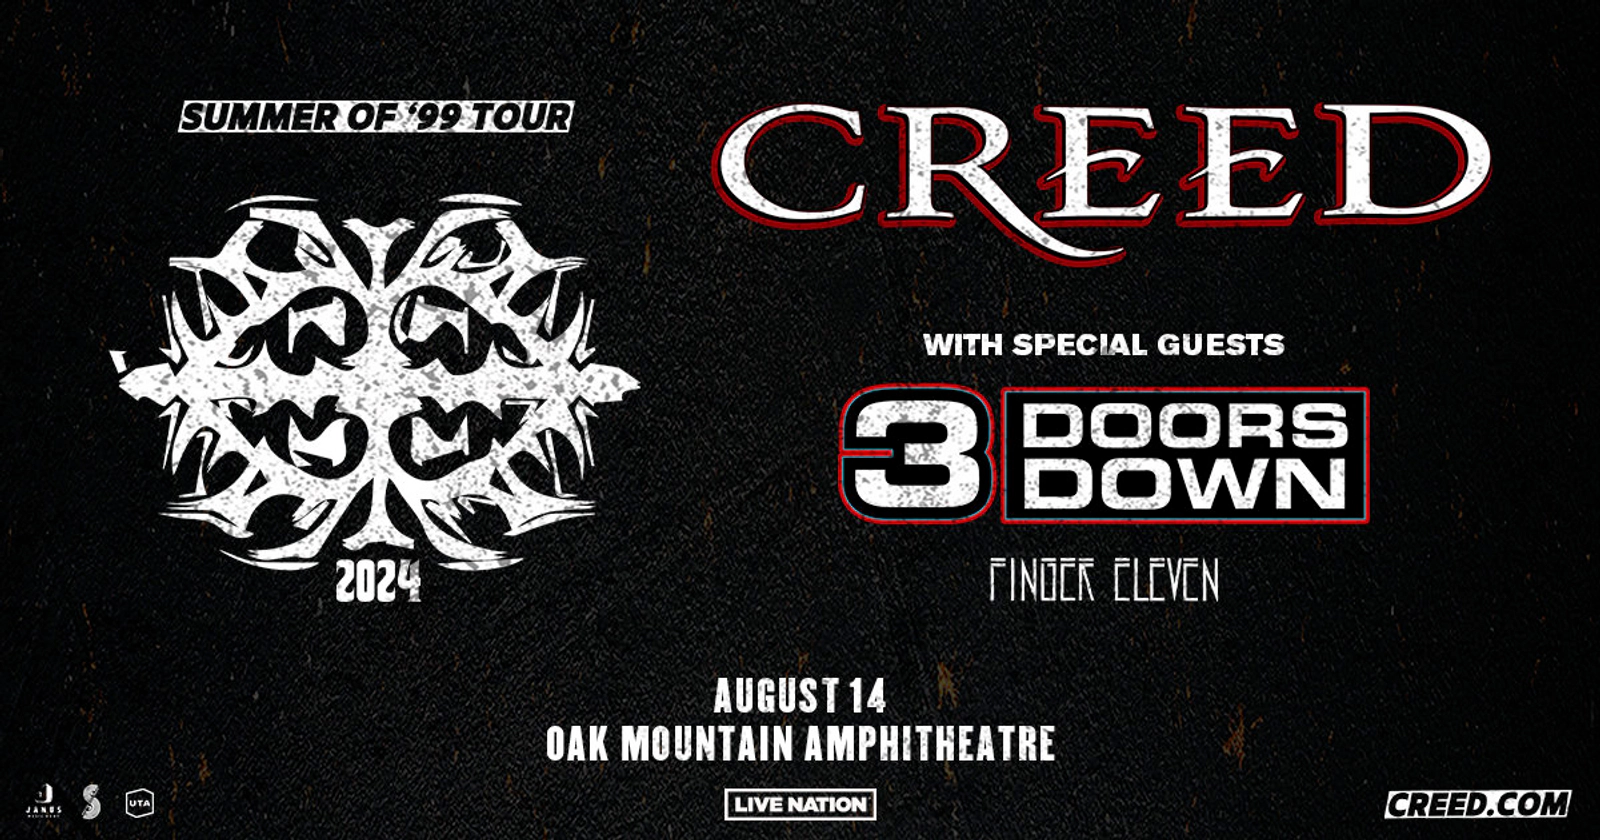 Creed with 3 Doors Down 94.1 ZBQ 94.1 ZBQ